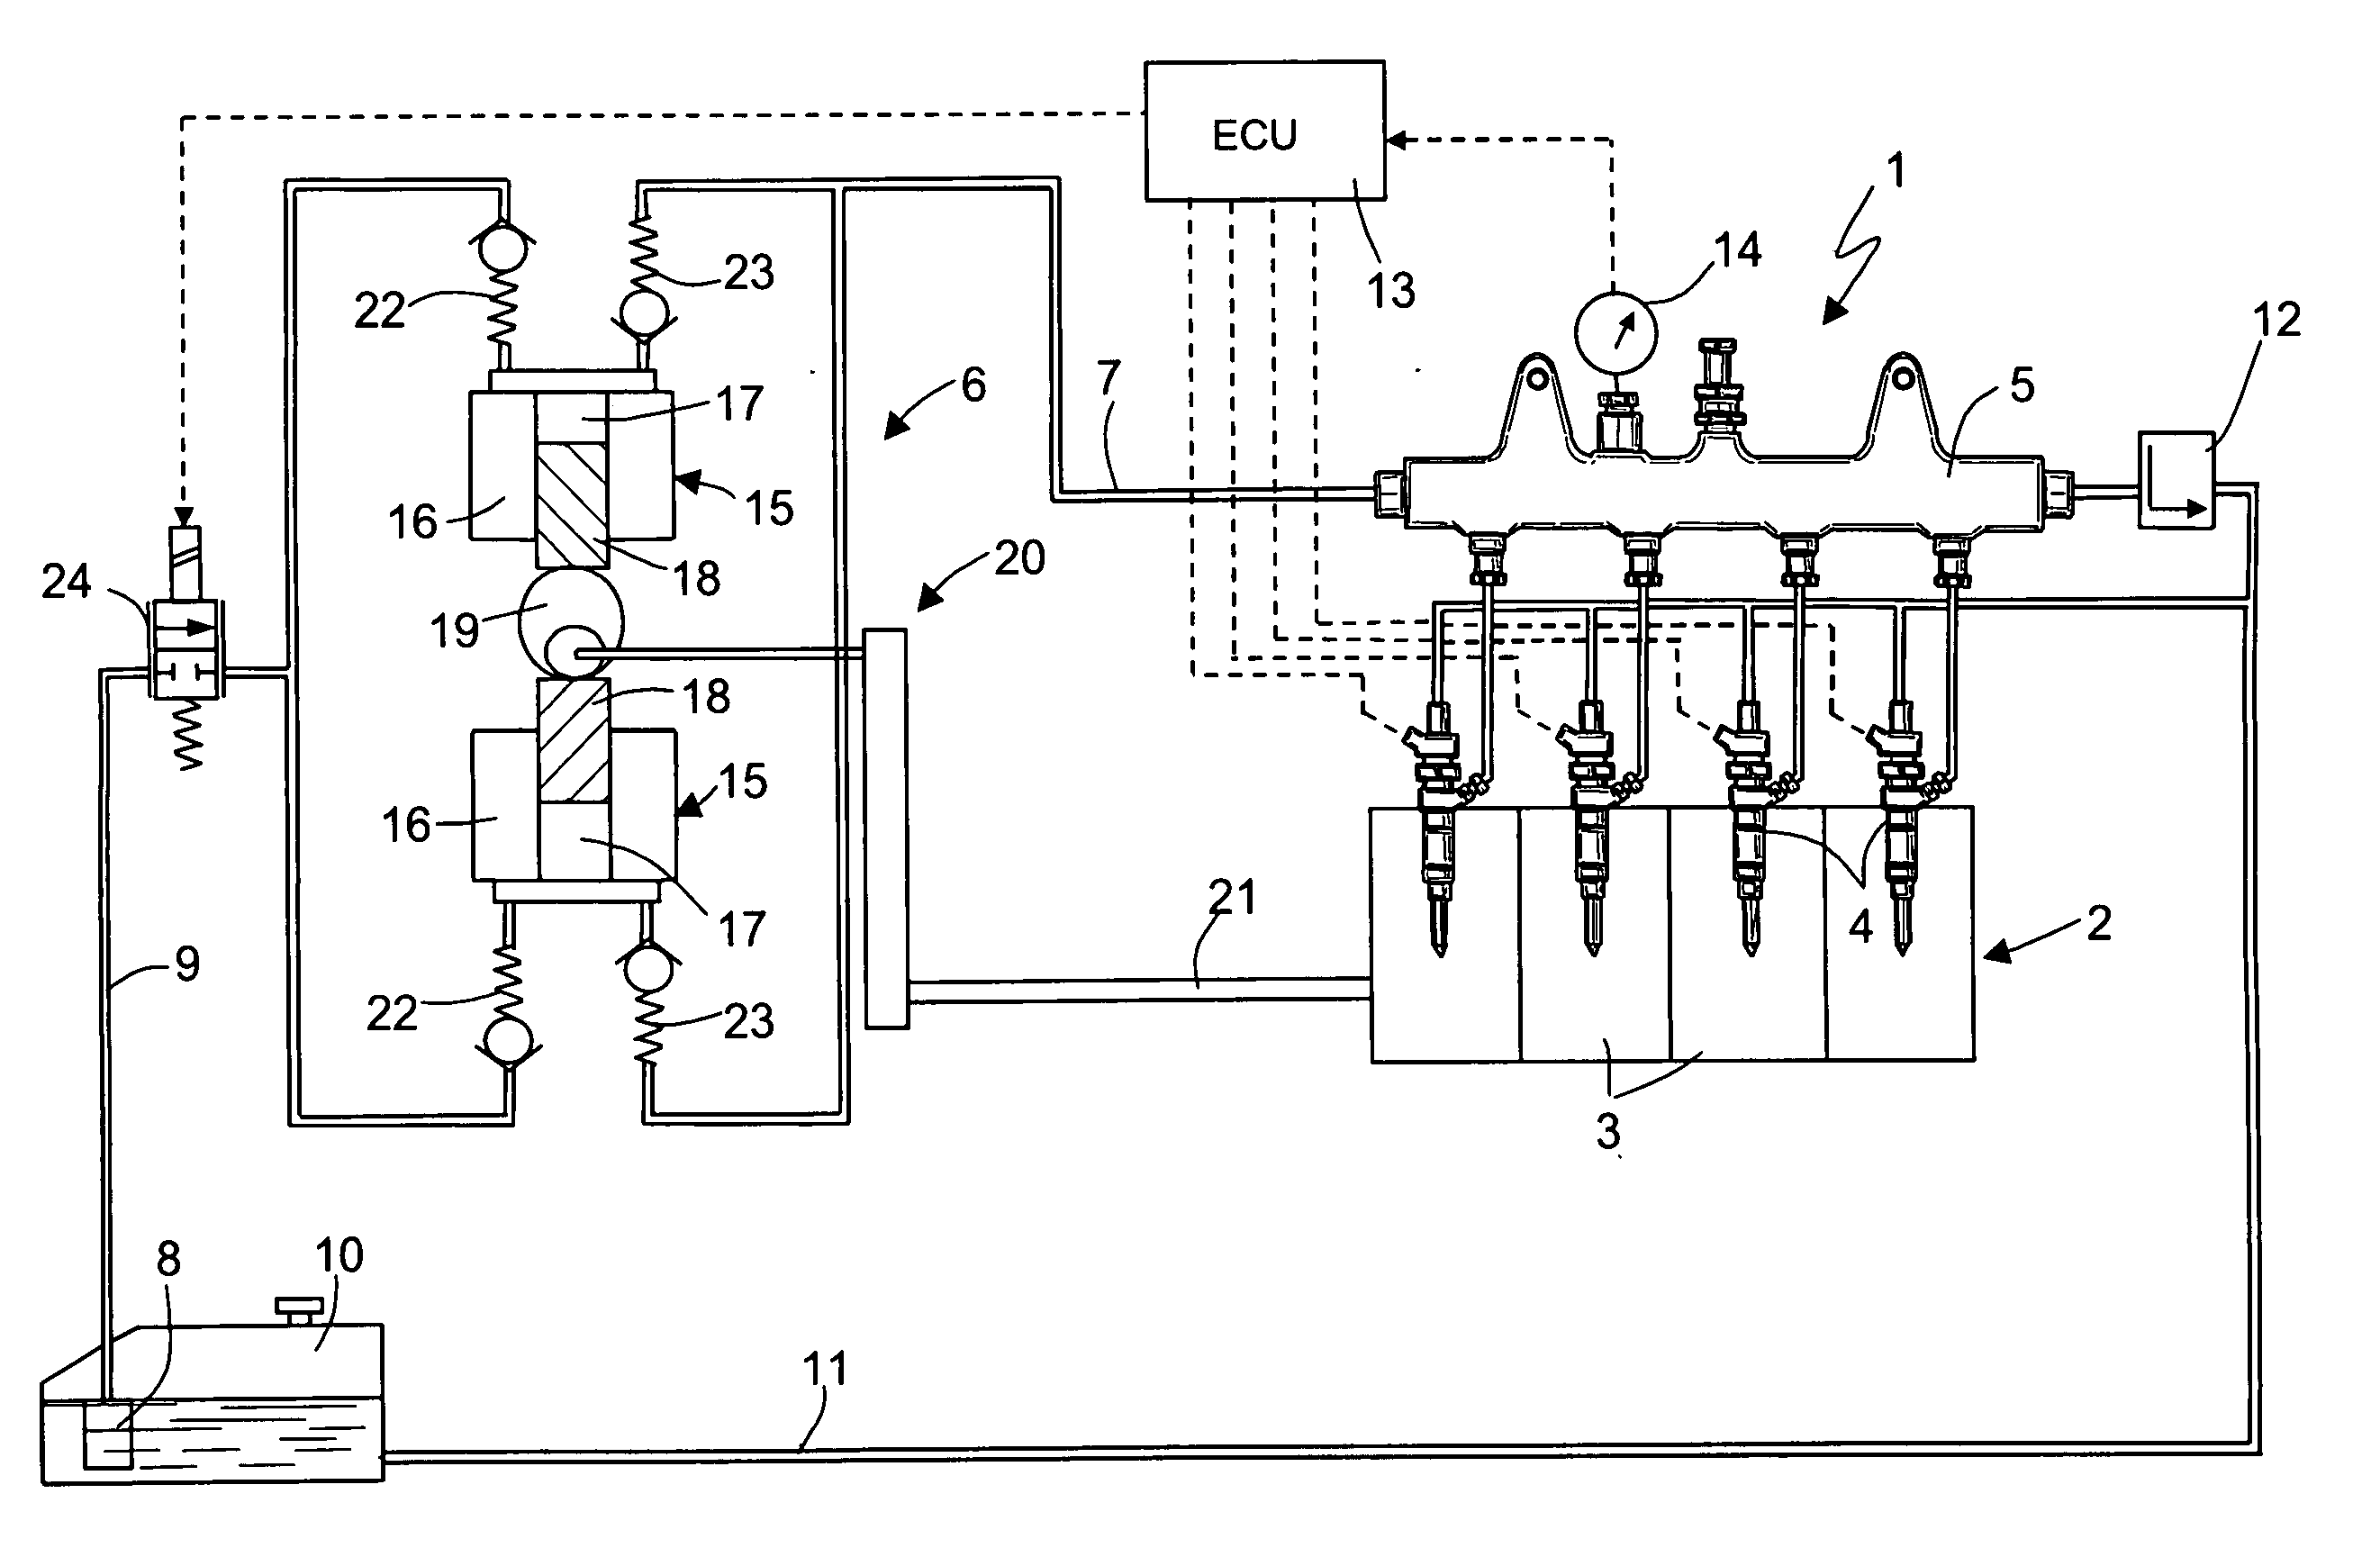 Control method for a direct injection system of the common-rail type provided with a shut-off valve for controlling the flow rate of a high-pressure fuel pump